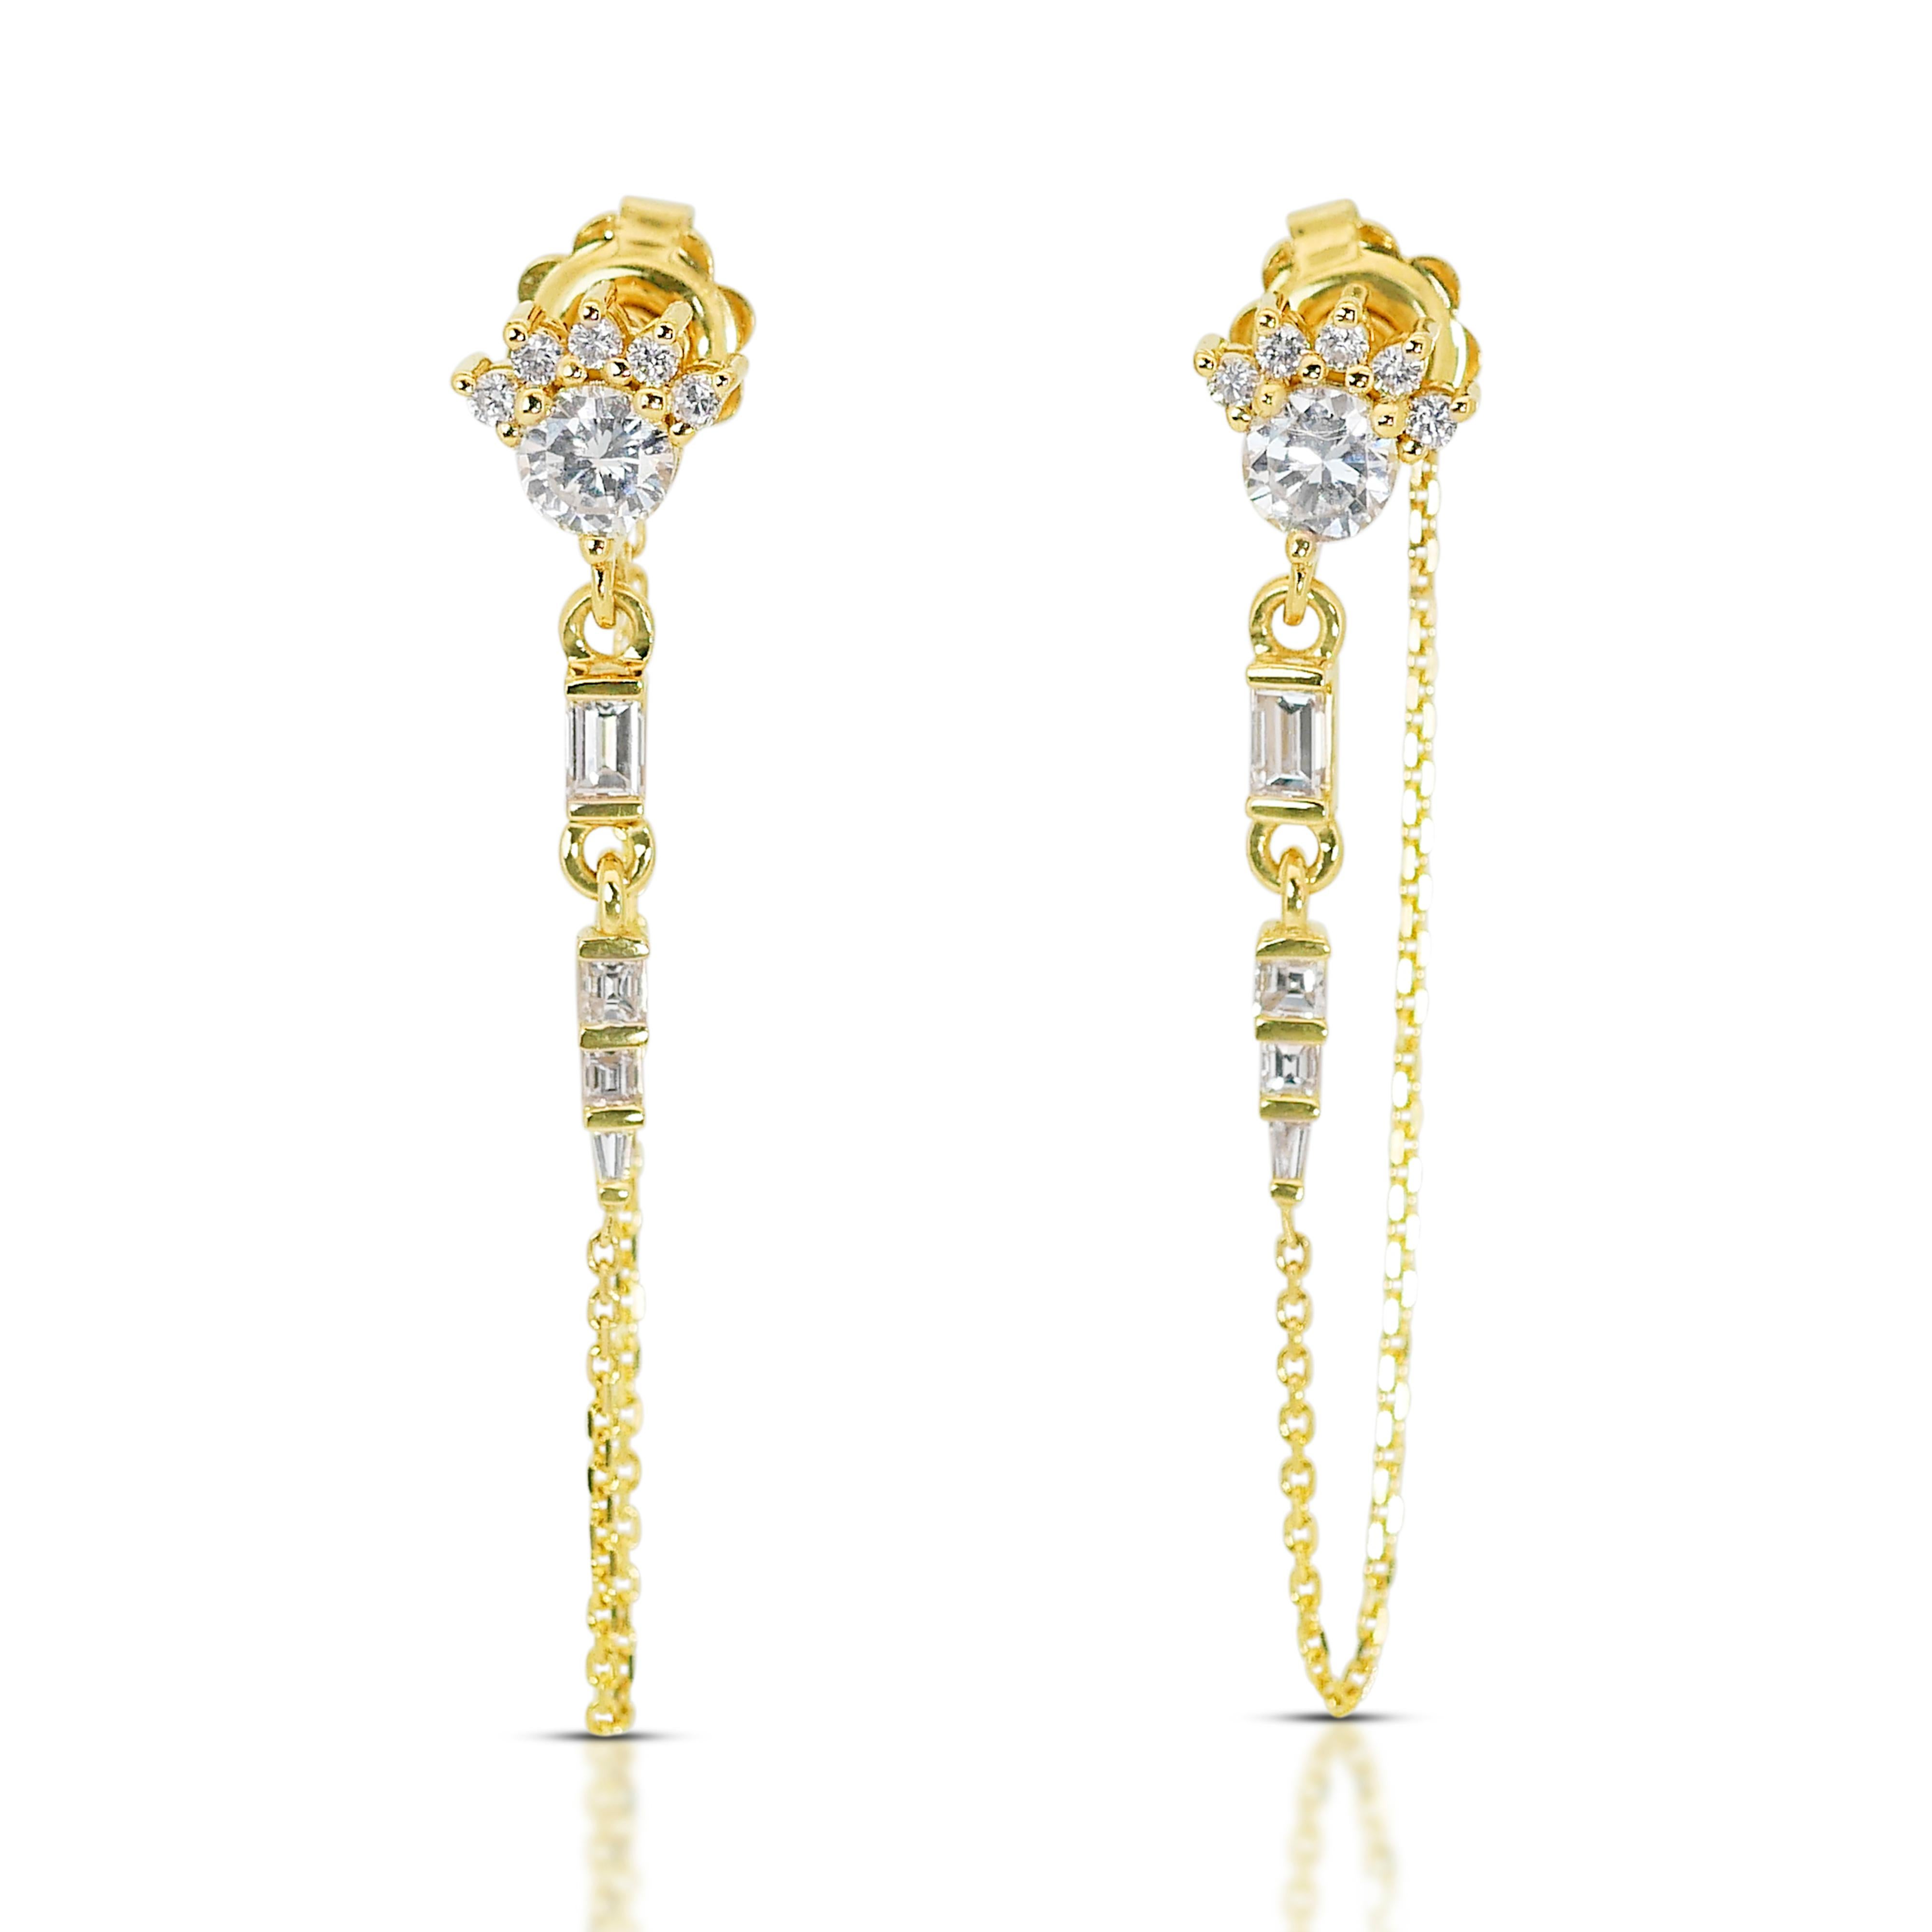 Adorn yourself with this fascinating pair of diamond drop earrings. This 18k yellow gold diamond earrings is accompanied by an IGI Certification, a testament to their exceptional quality and authenticity. Each earrings is adorned with additional